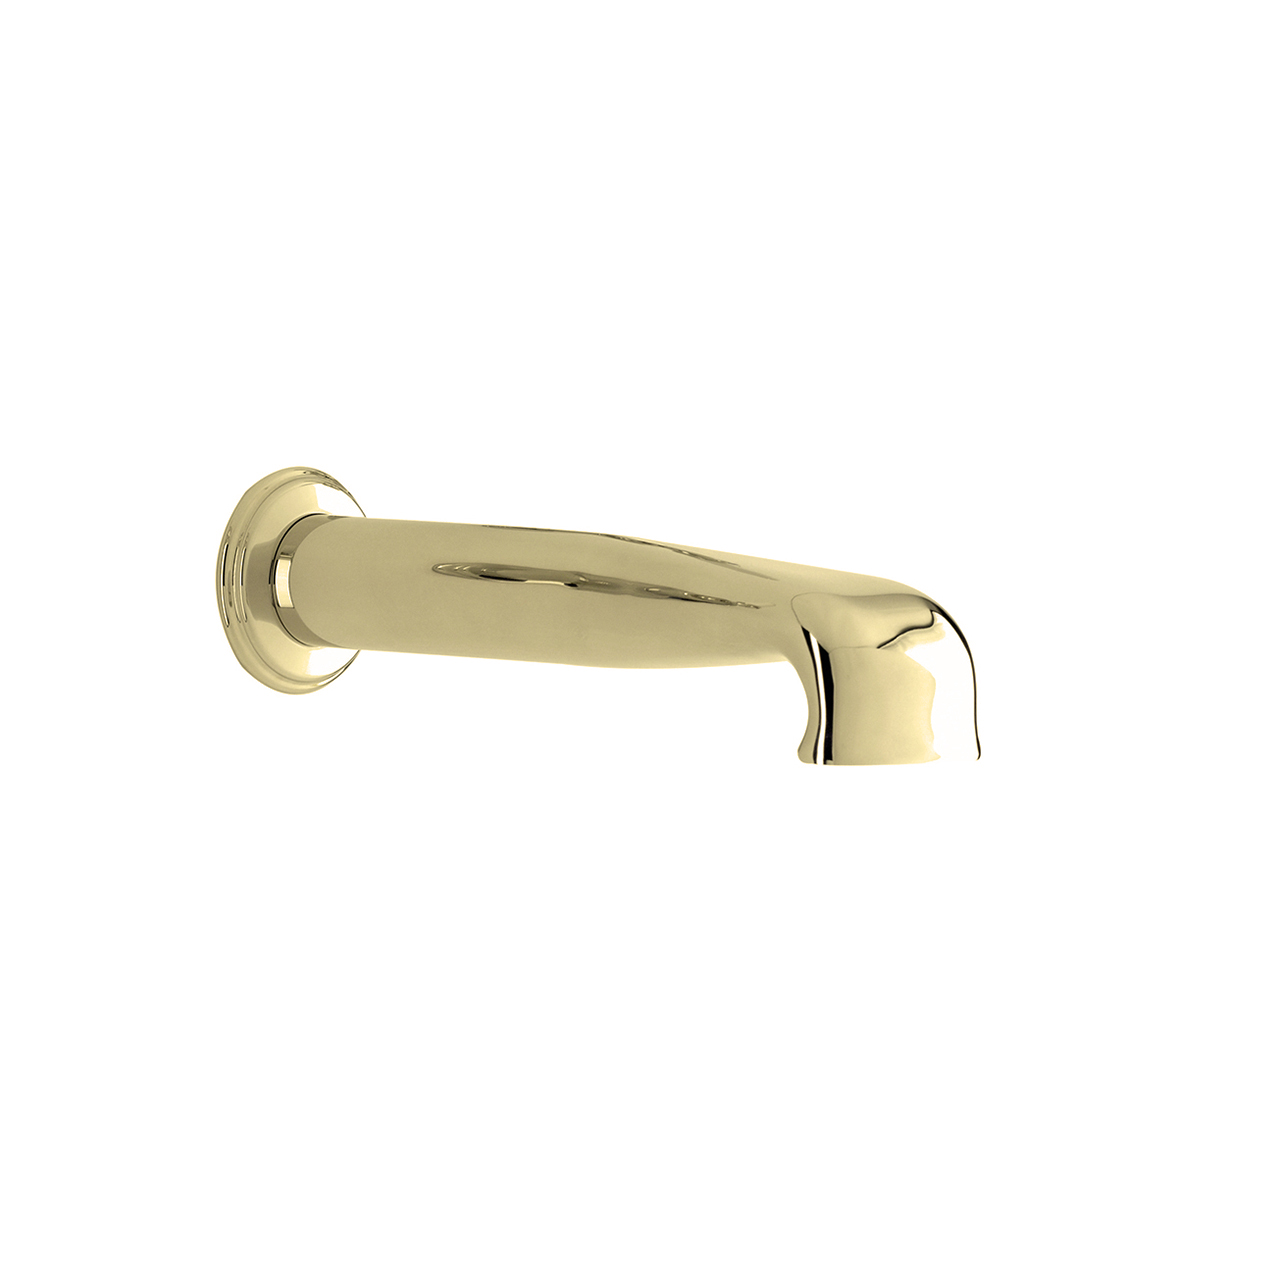 Perrin & Rowe - Wall mounted low bath spout | The English Tapware Company